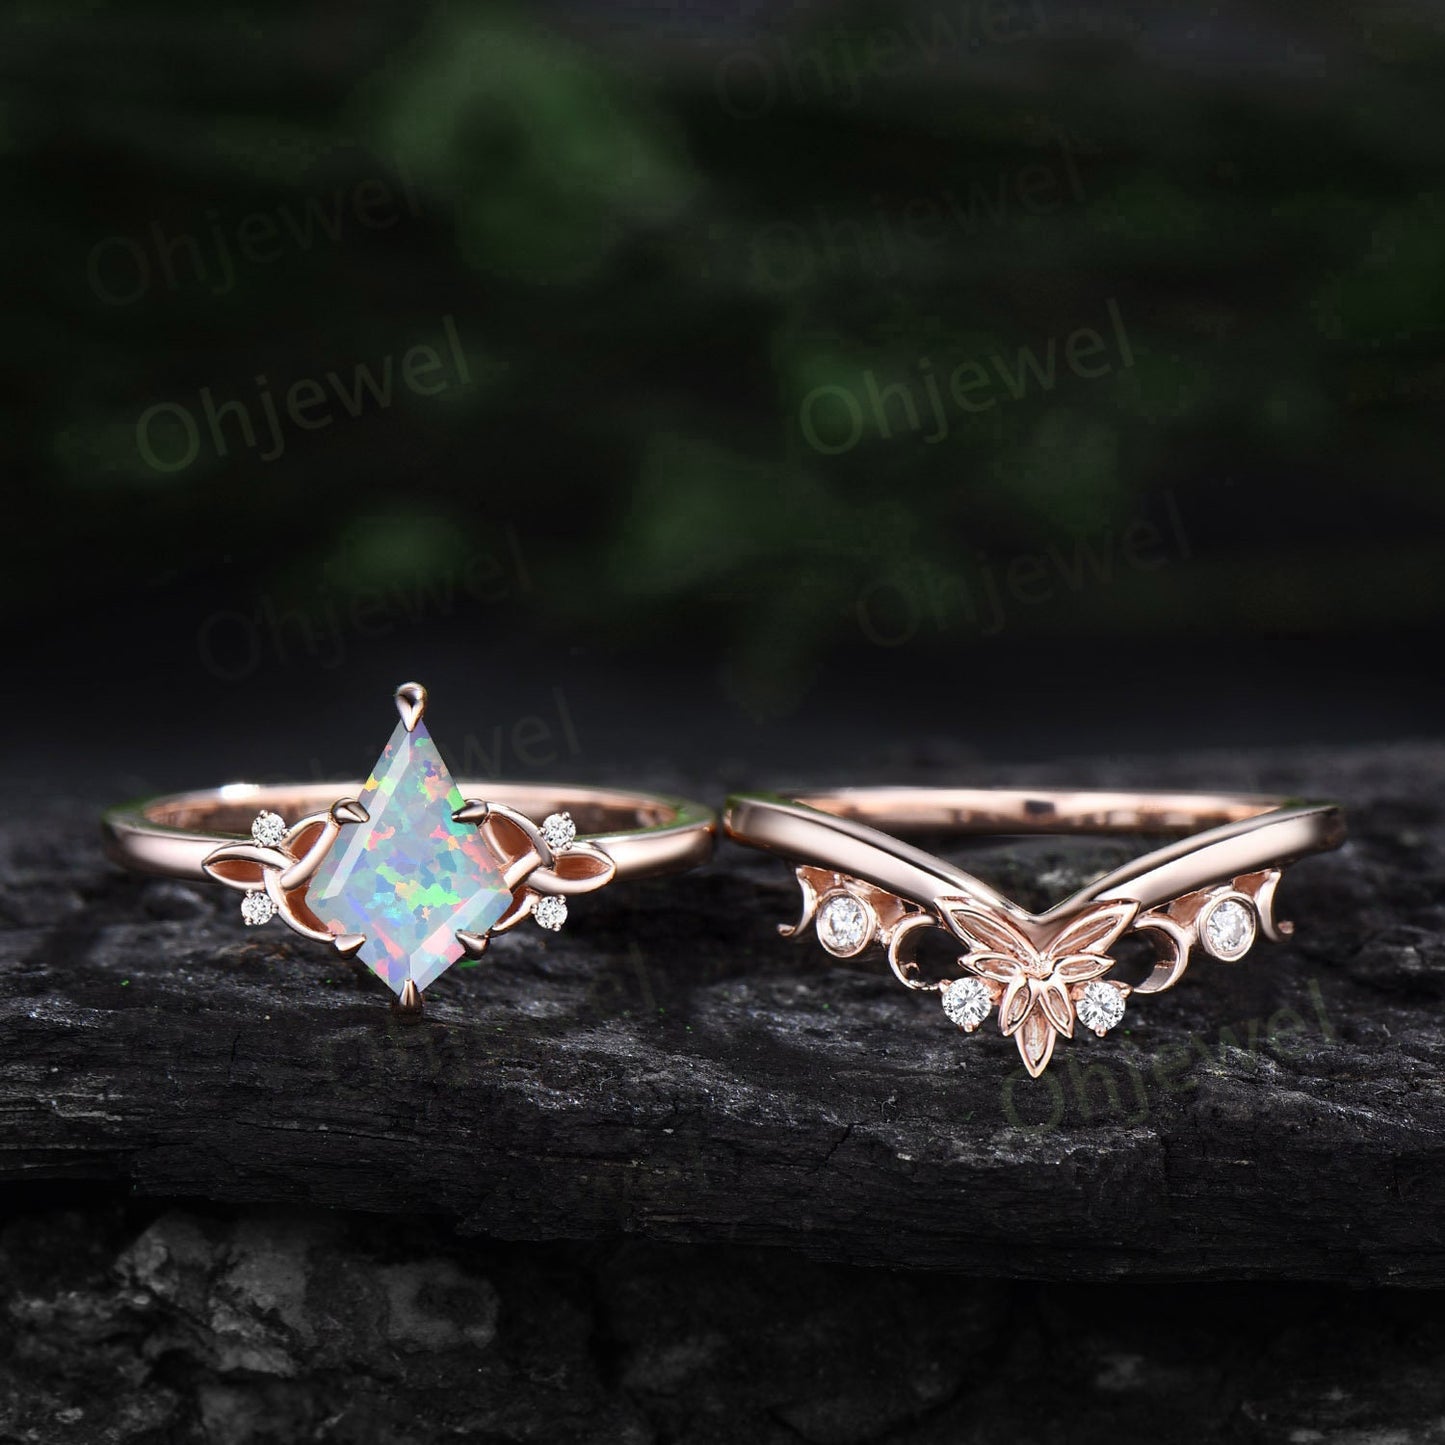 White opal ring women vintage Kite cut opal engagement ring Celtic Knot rose gold five stone cluster diamond ring unique promise ring set